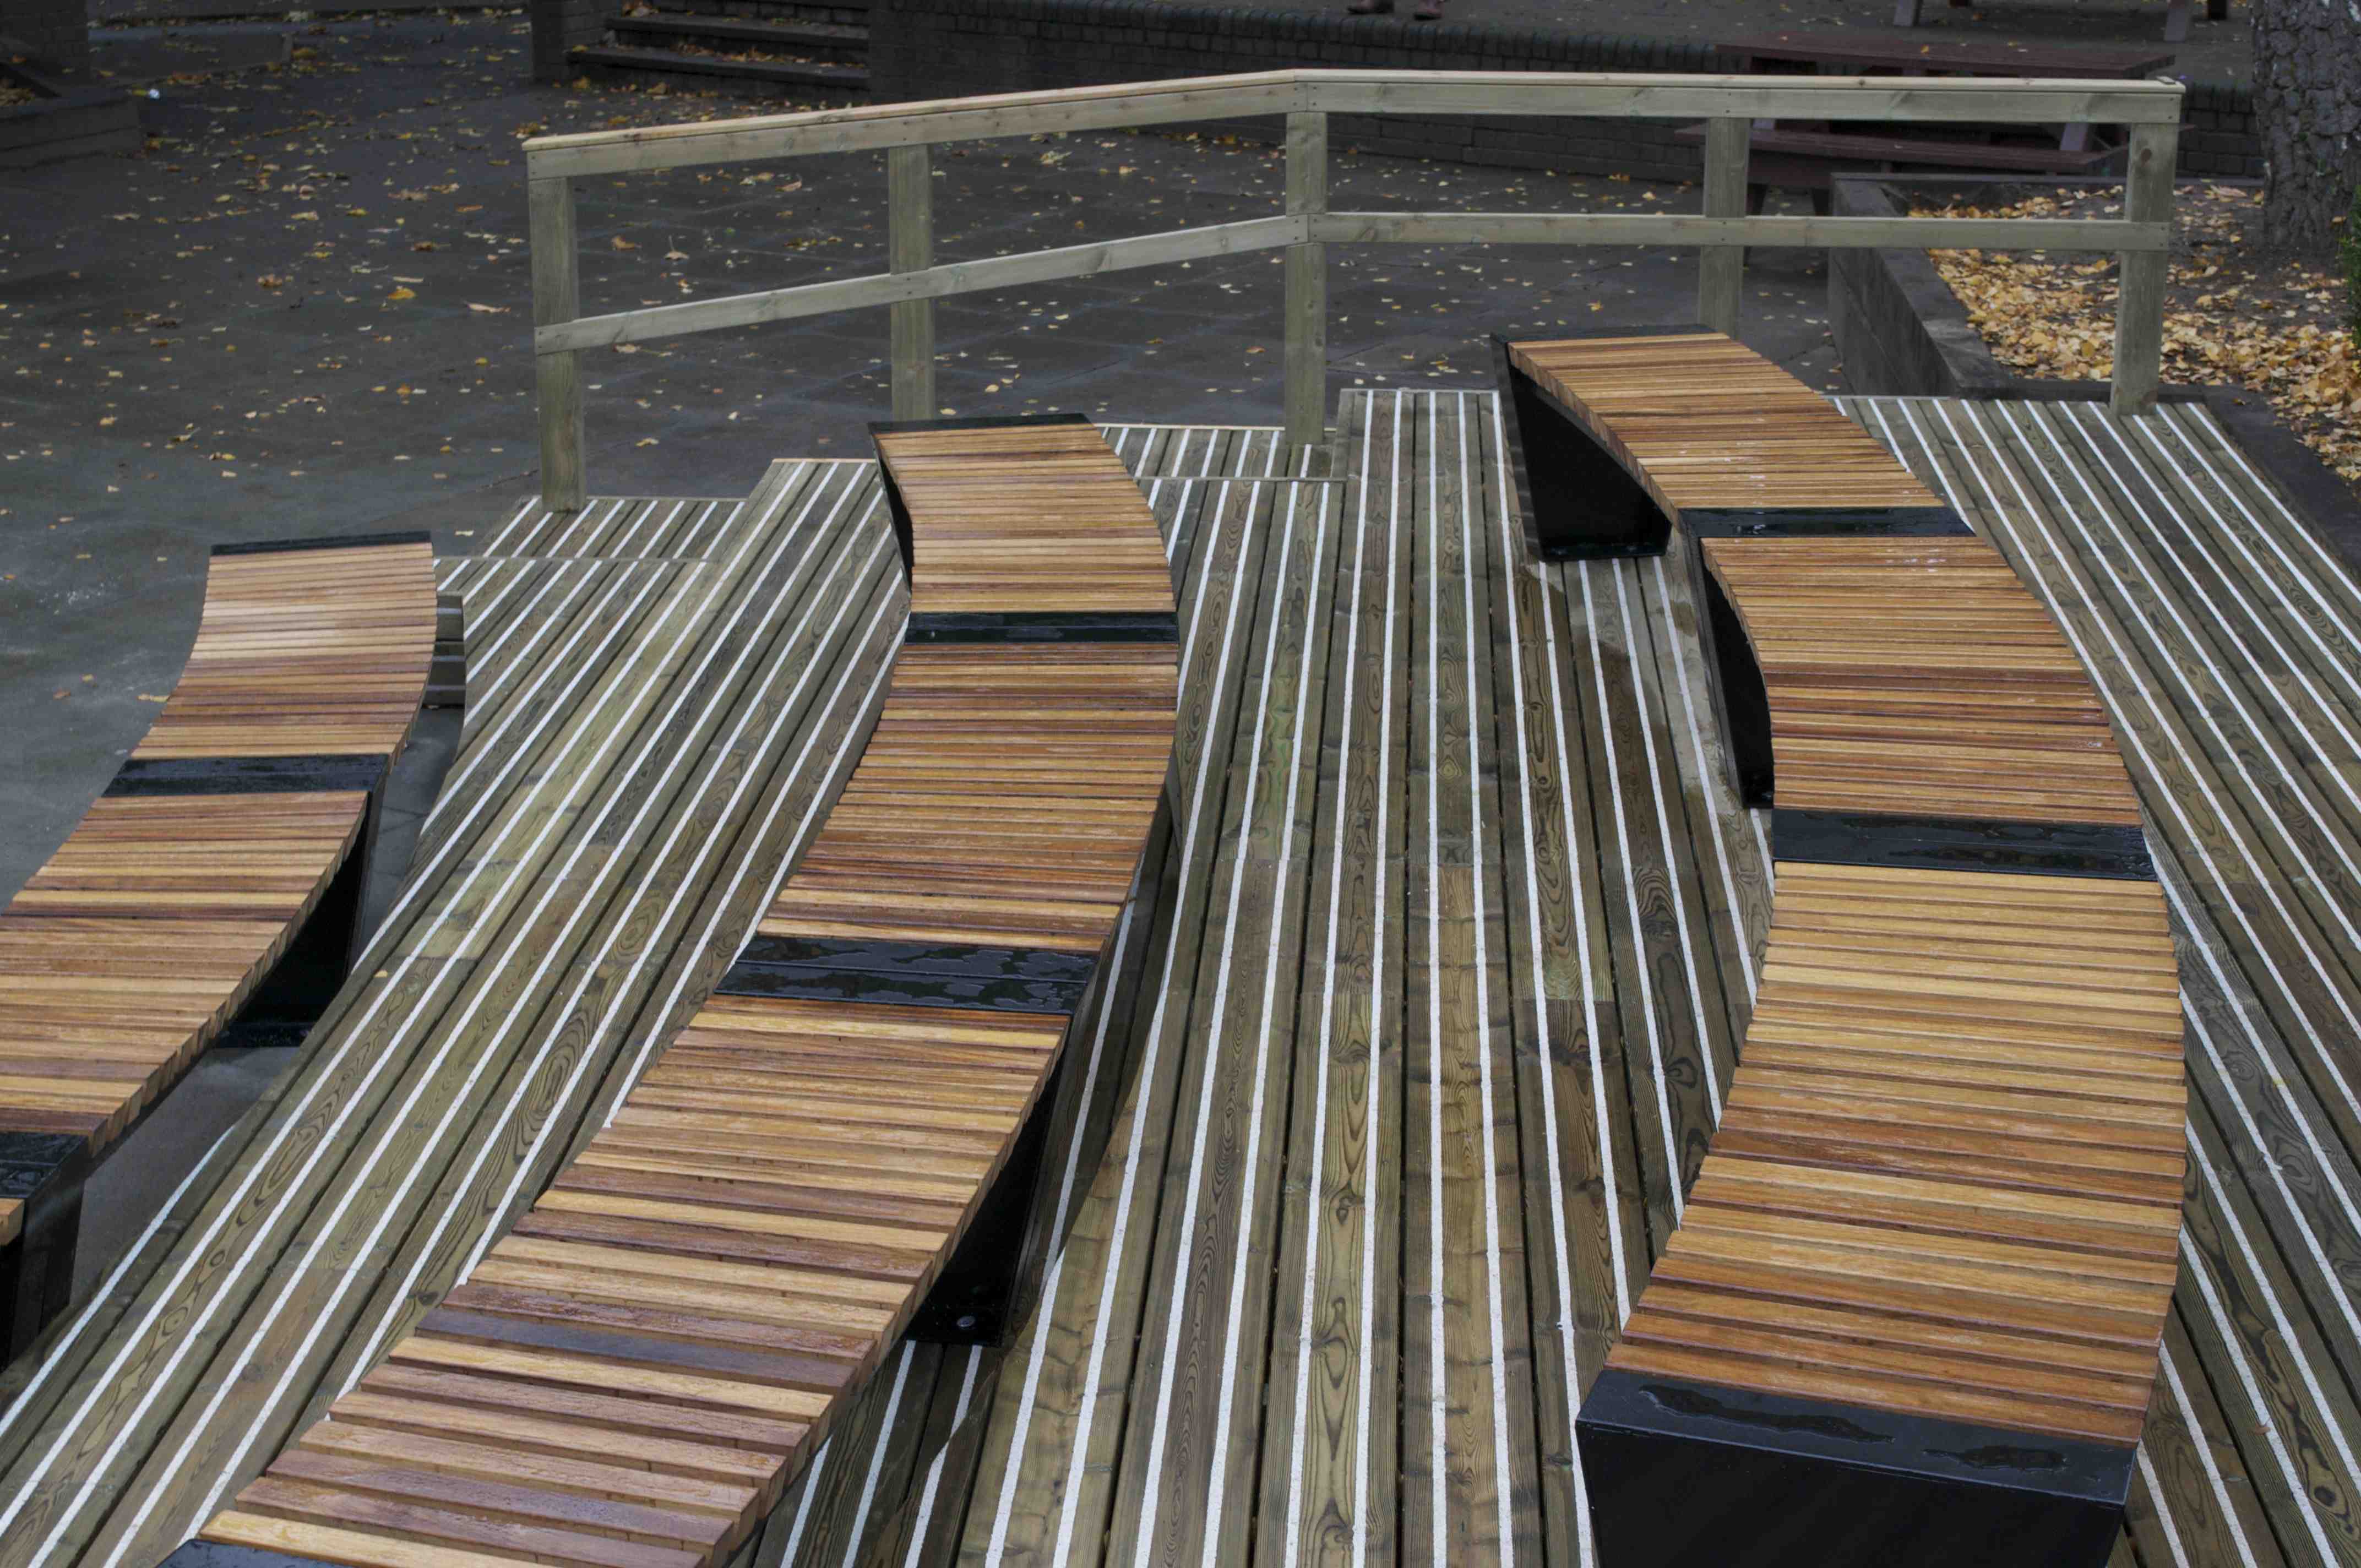 Marley Citideck installed on outdoor theatre